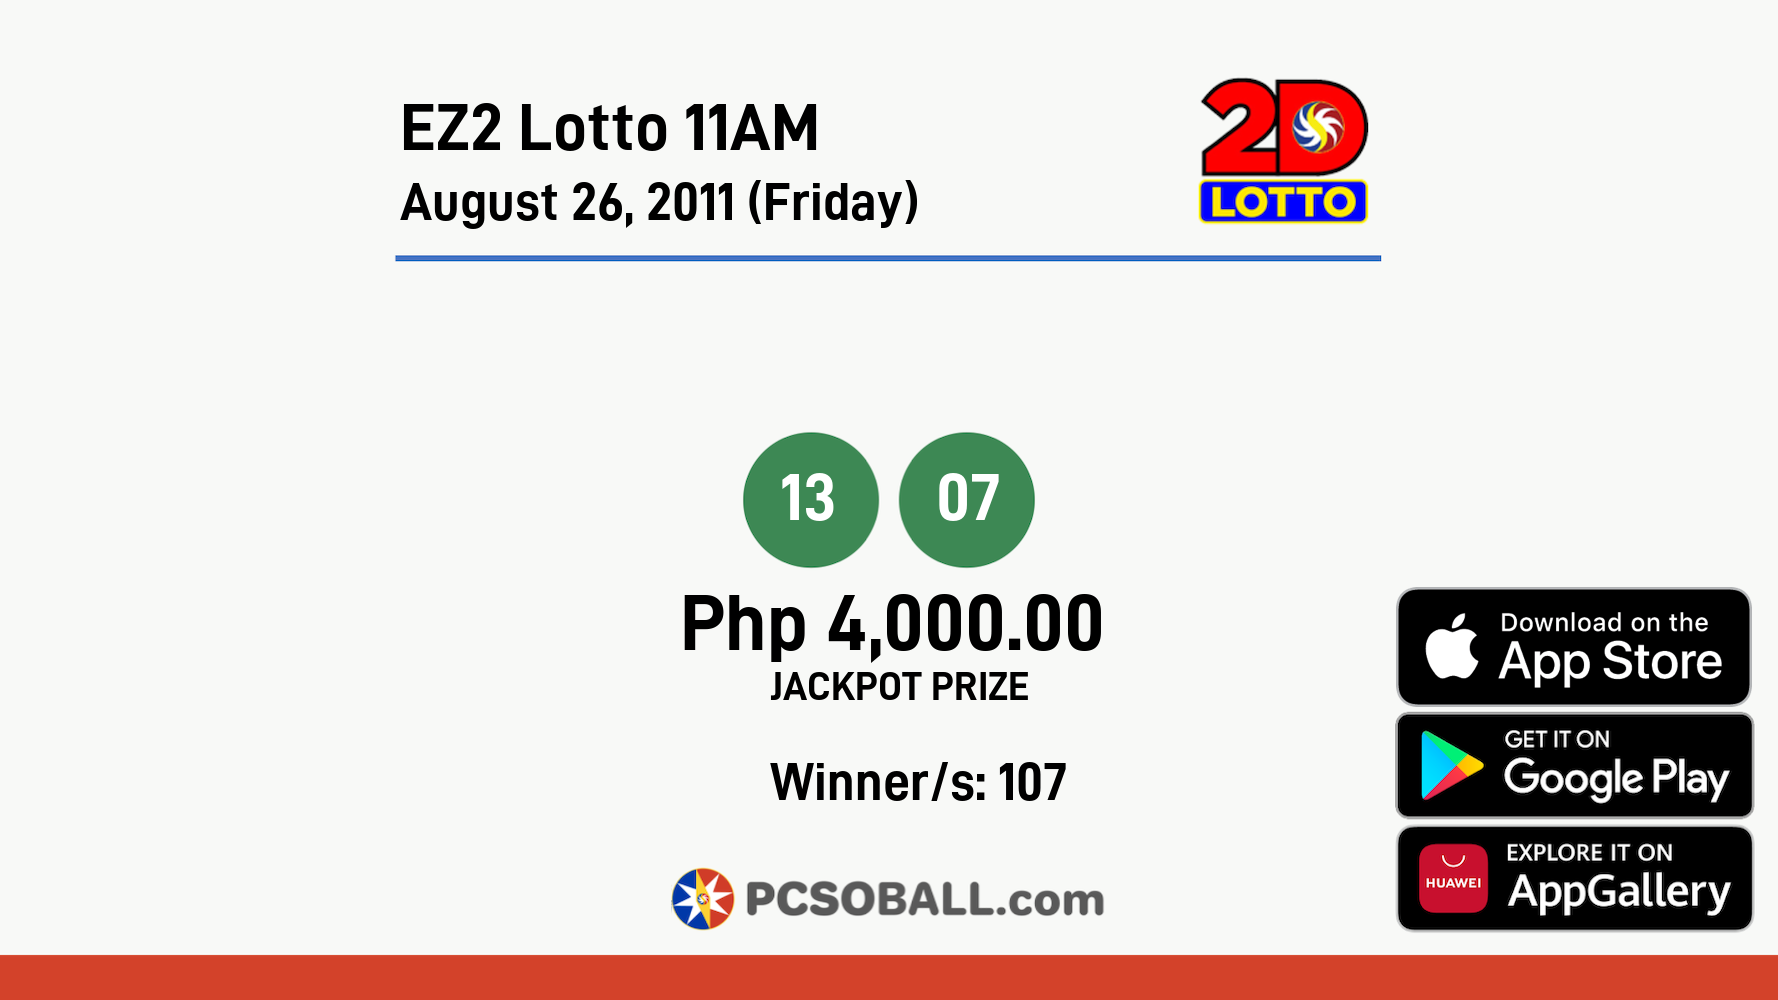 EZ2 Lotto 11AM August 26, 2011 (Friday) Result